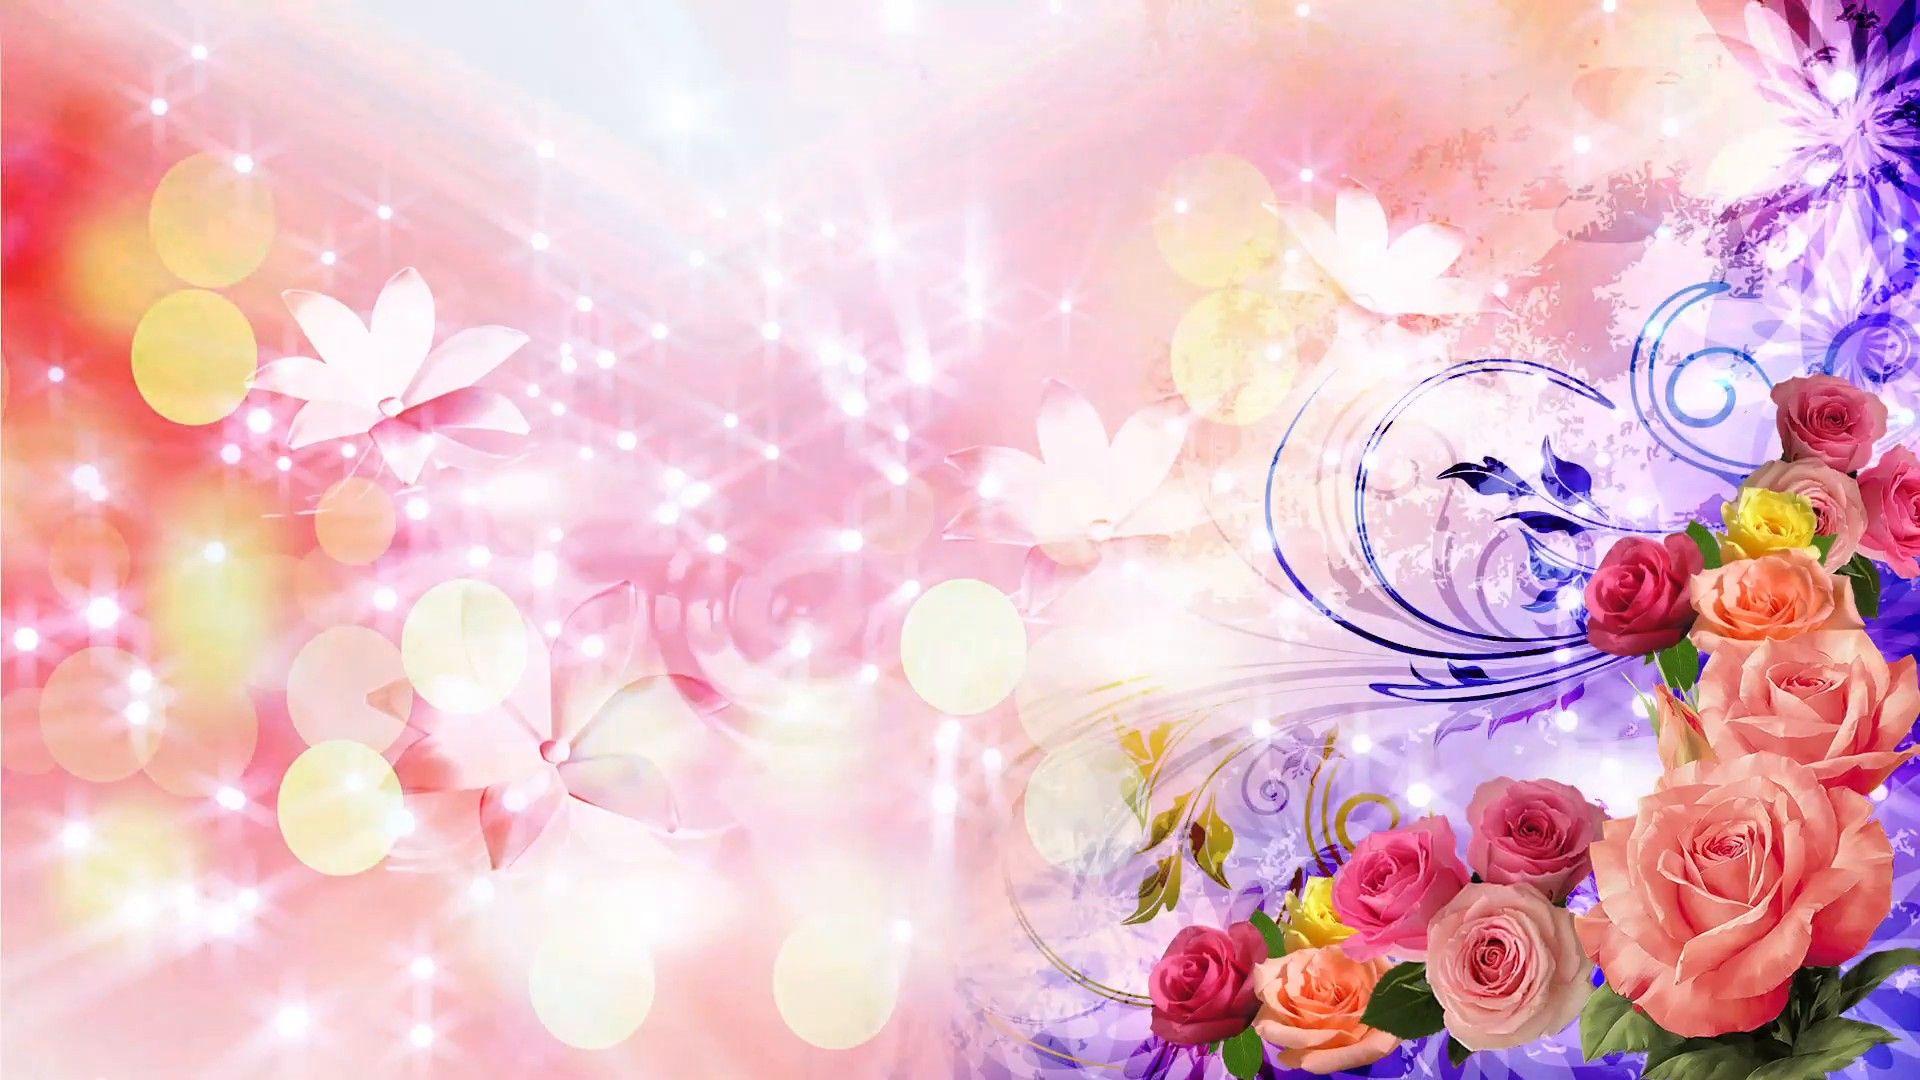 Wedding Background Image HD Png